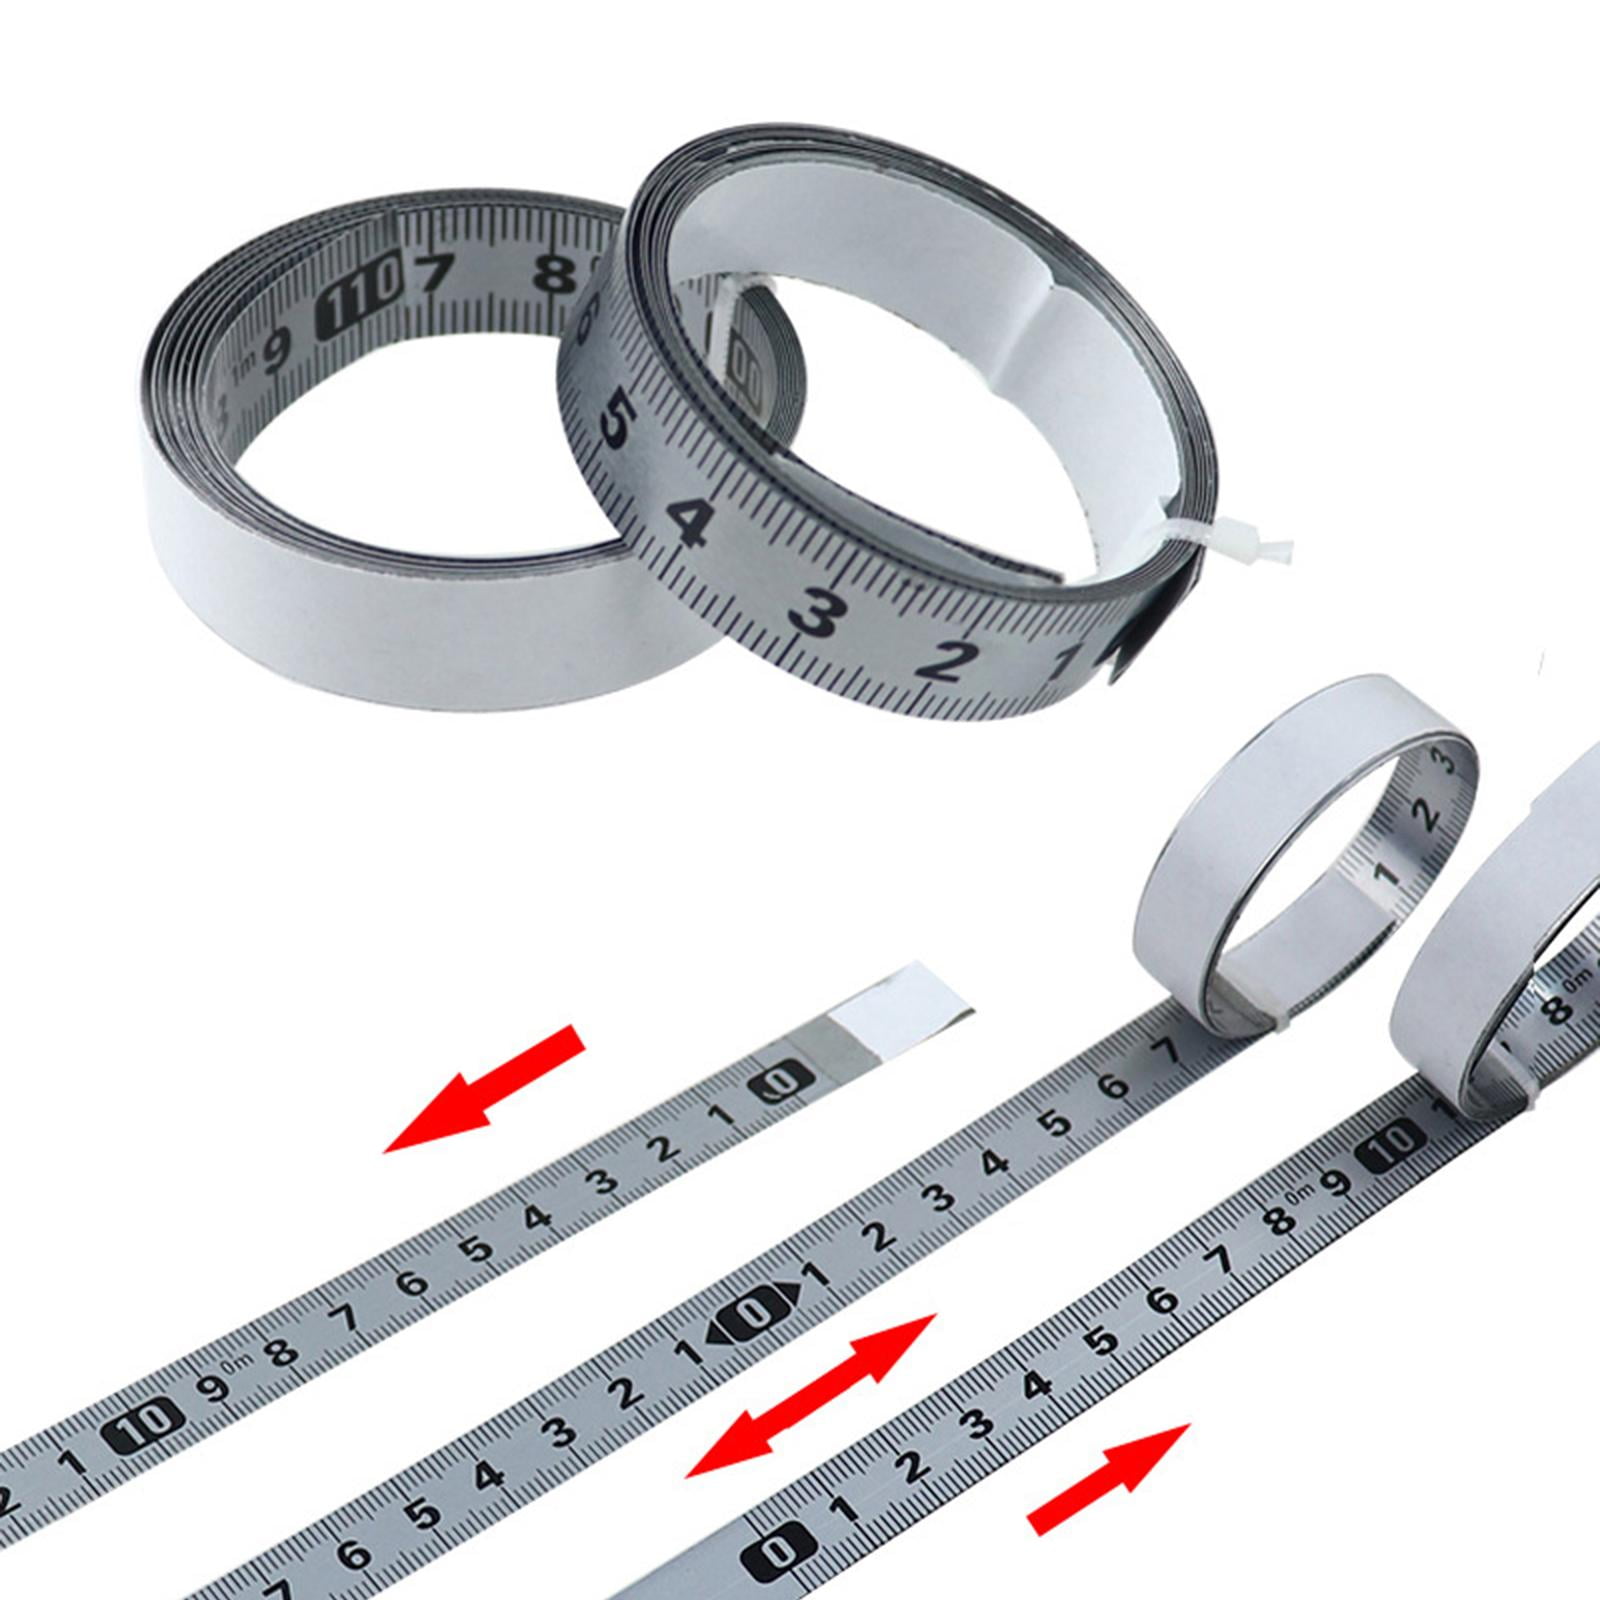 Self Adhesive Tape Measure Metric 100cm/150cm/200cm Measuring Tape Vertical  Read Workbench Ruler Saw Table Woodworking Tools - AliExpress